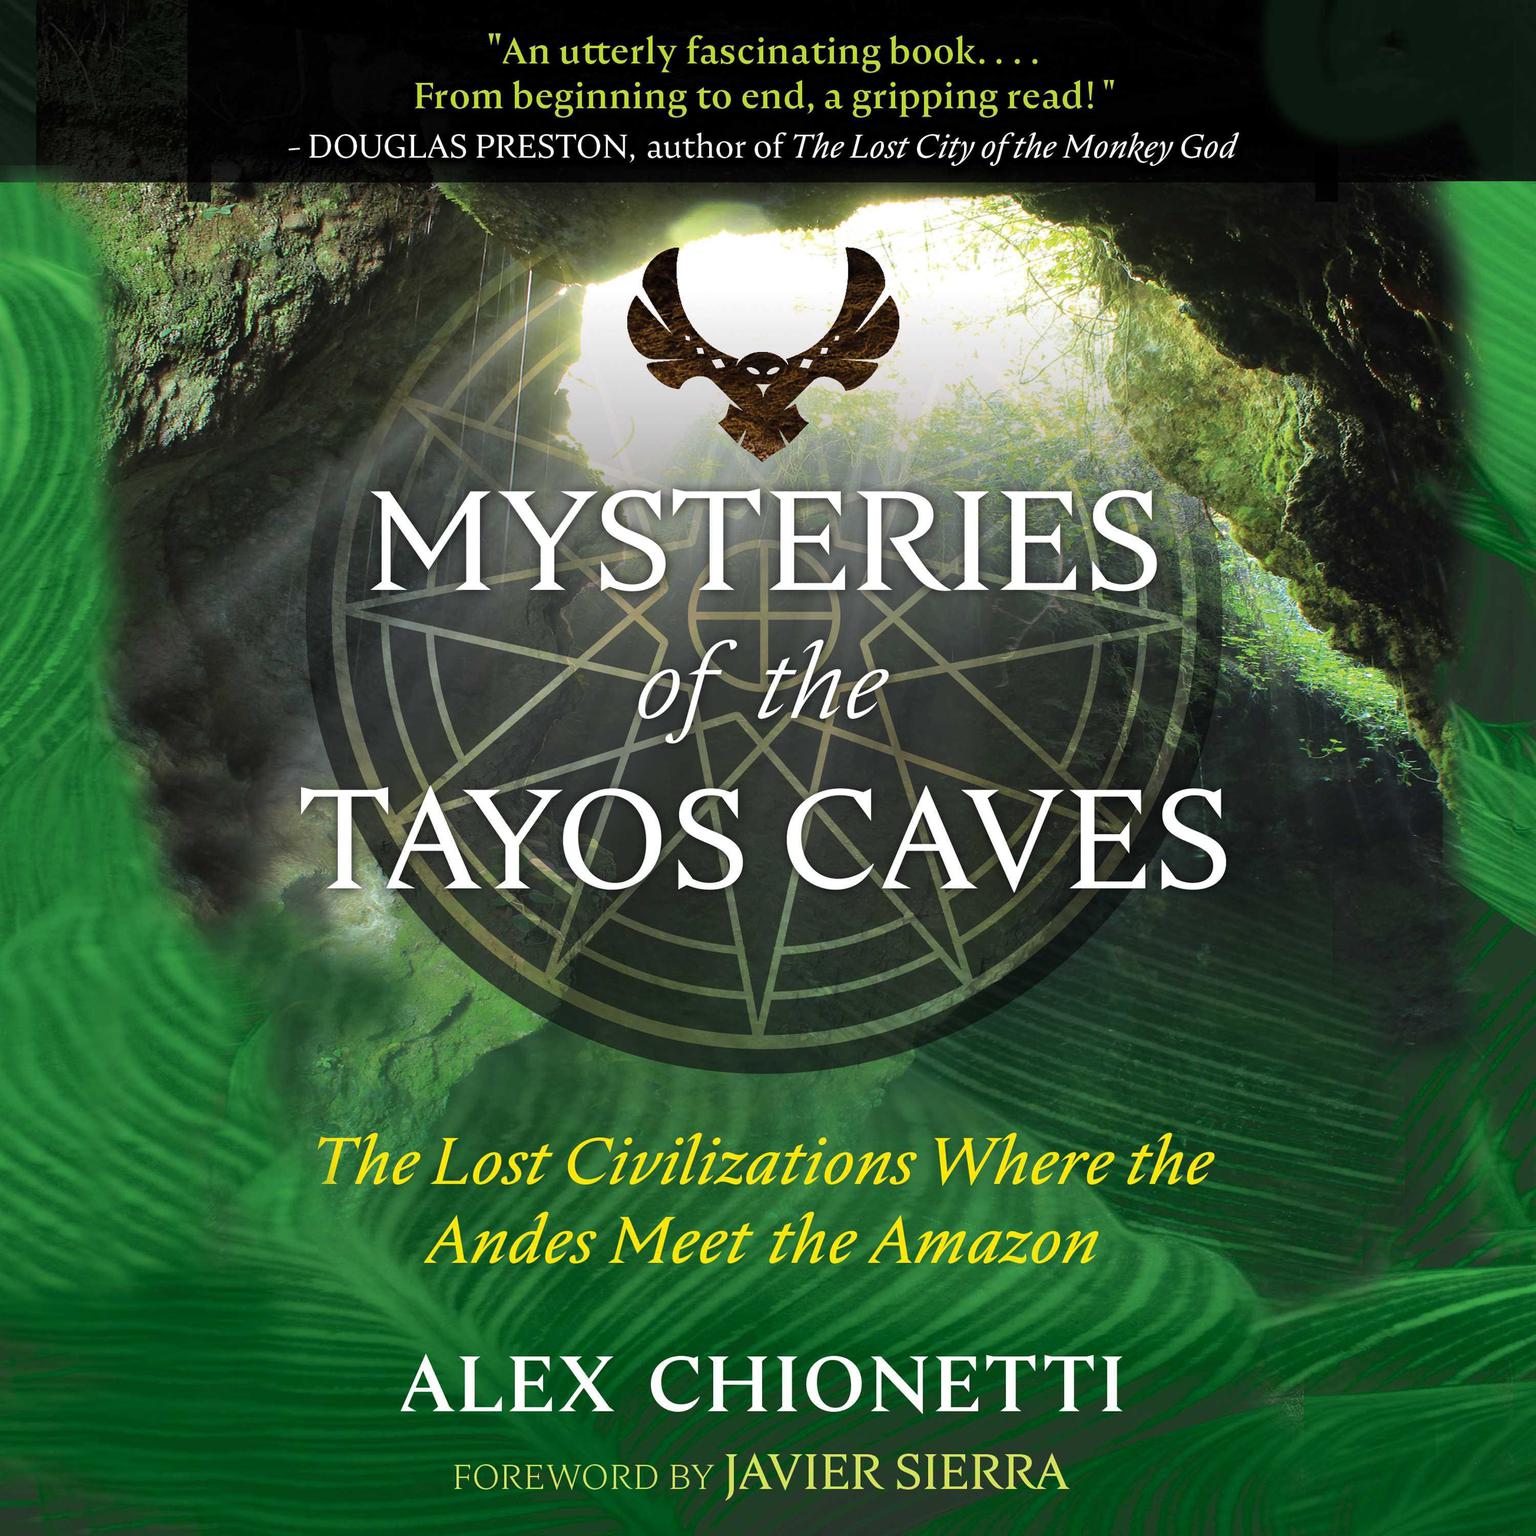 Mysteries of the Tayos Caves: The Lost Civilizations Where the Andes Meet the Amazon Audiobook, by Alex Chionetti